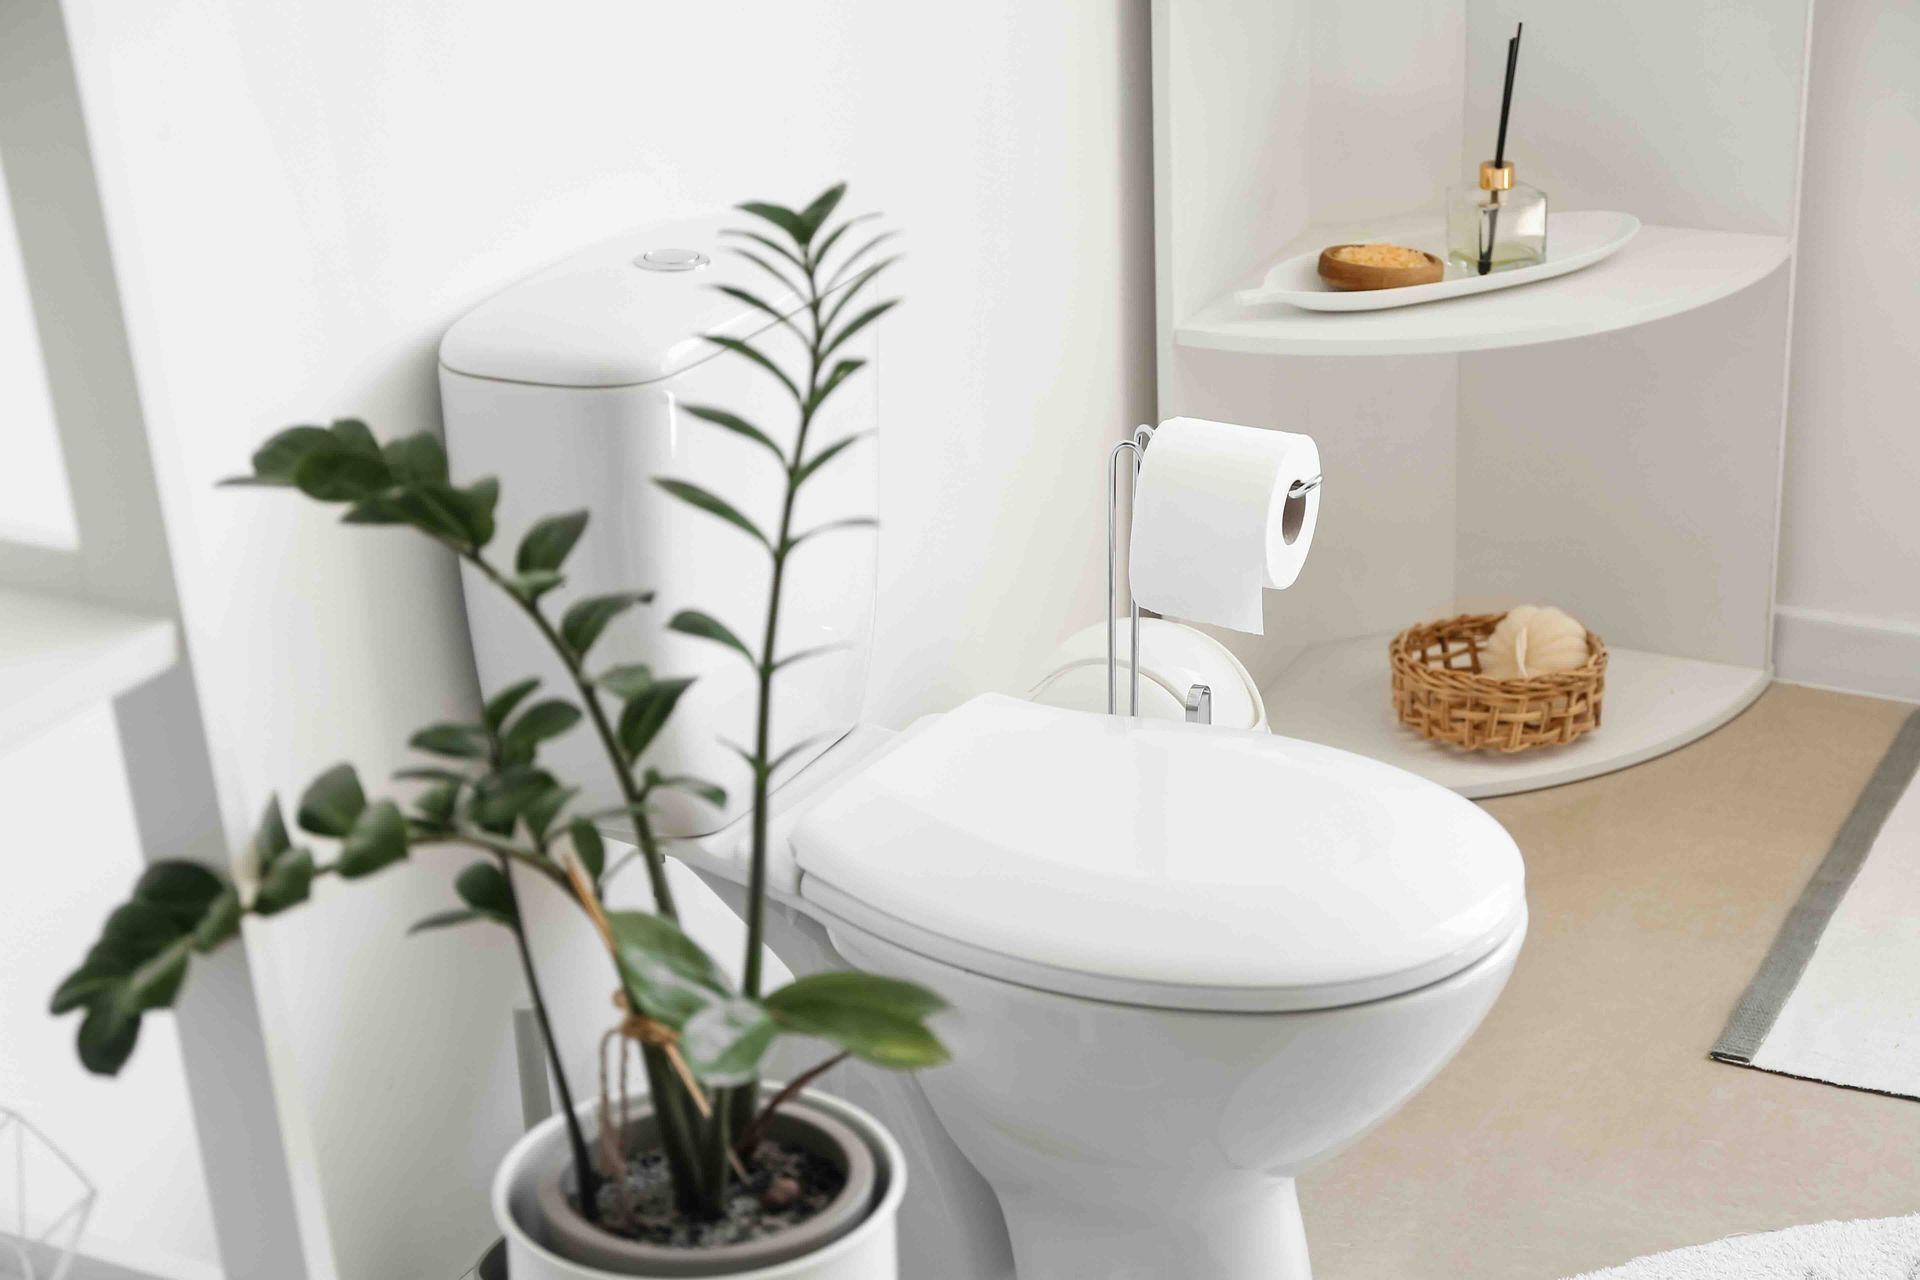 a toilet with a potted plant next to it in a bathroom.